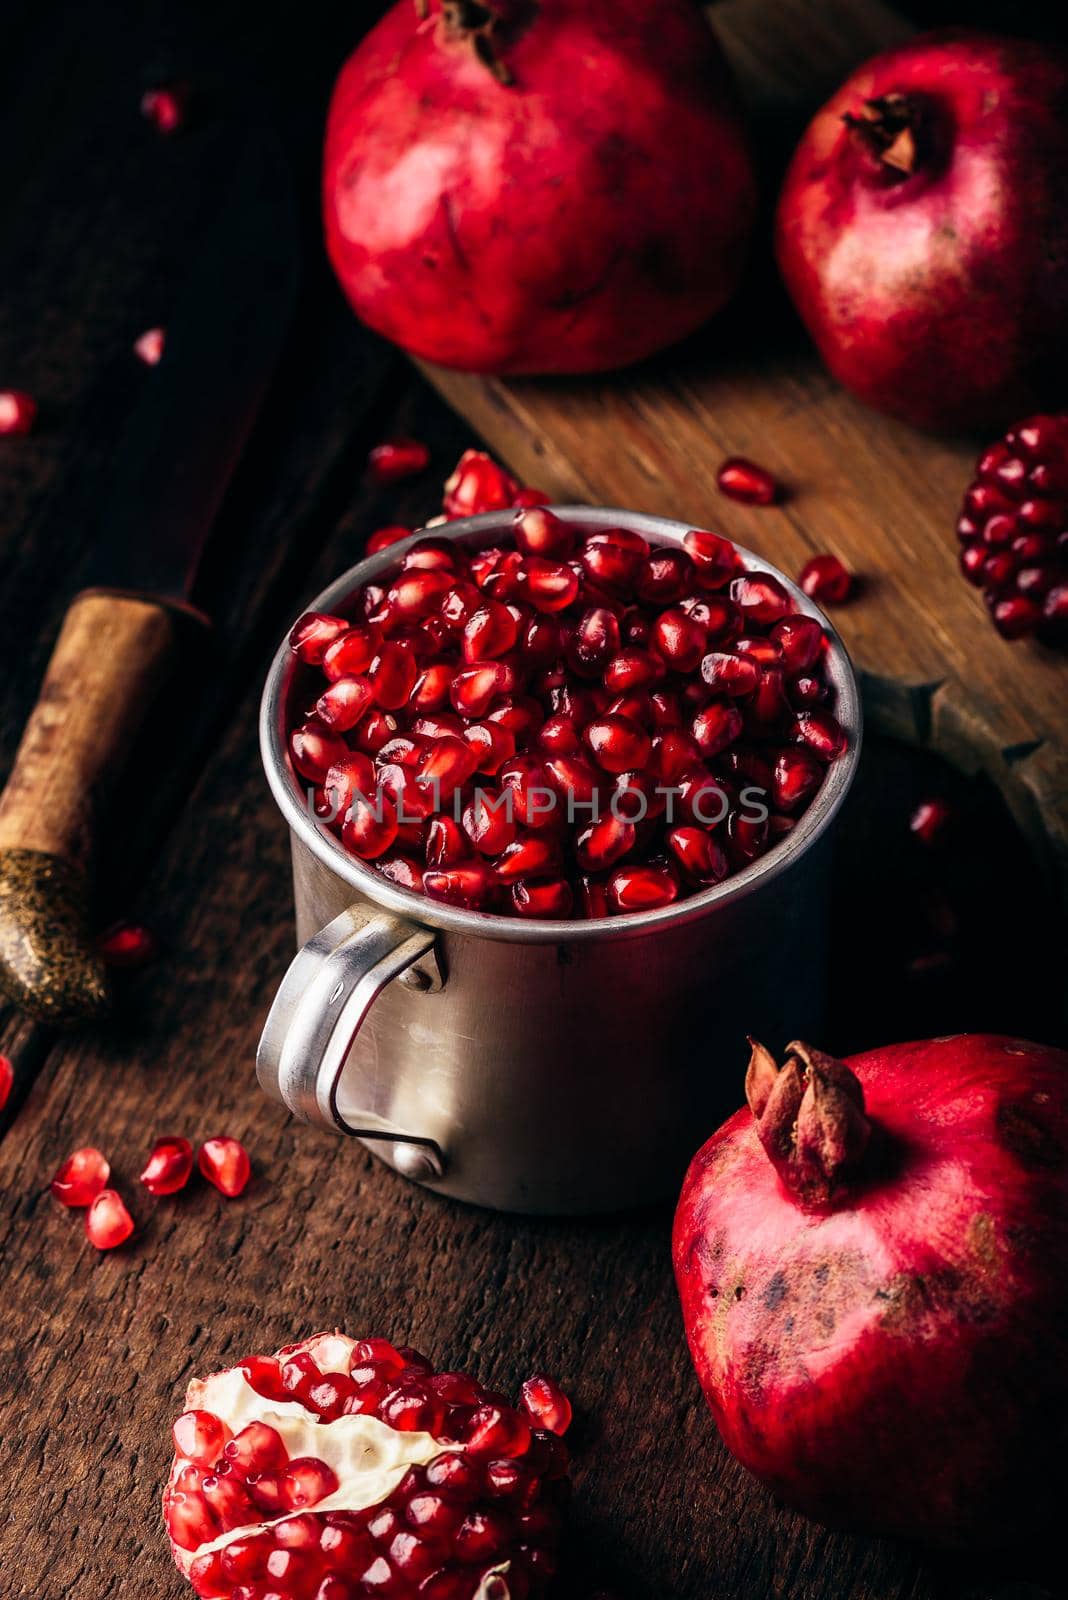 Metal rustic mug full of pomegranate seeds. Whole fruits and pomegranate pieces on dark wooden surface.